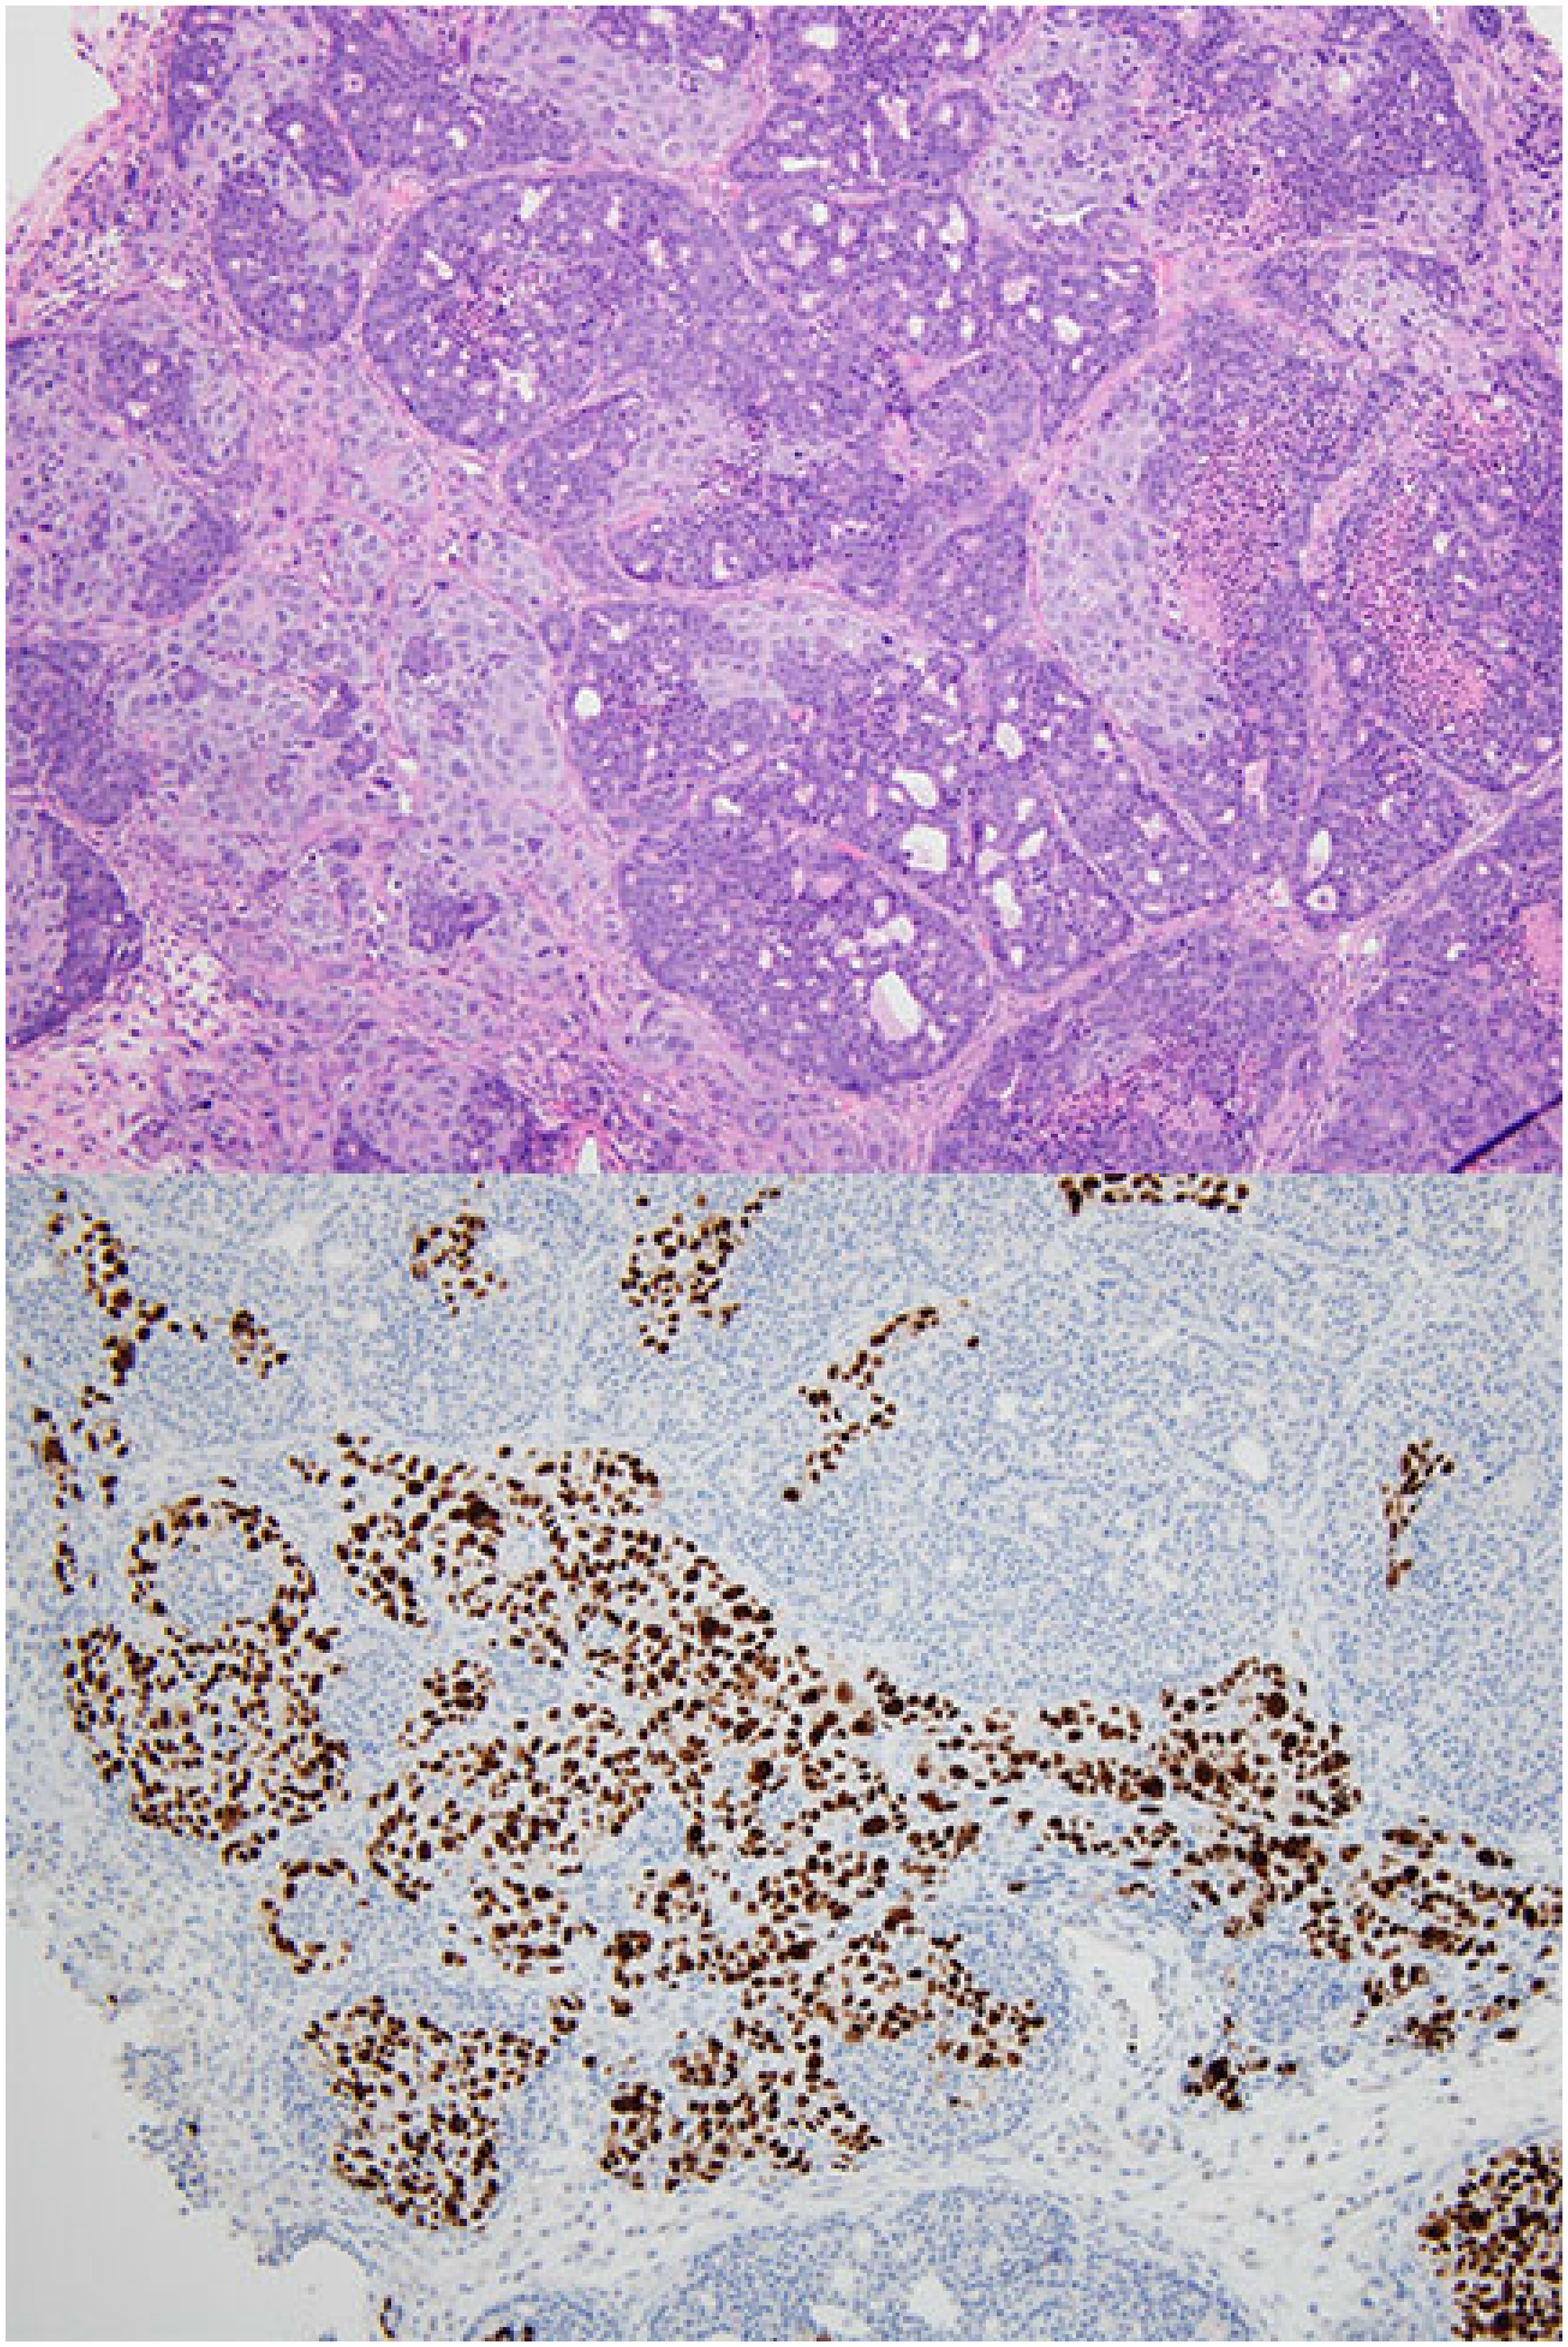 Collision tumor of mouse mammary tumor and patient-derived xenograft.